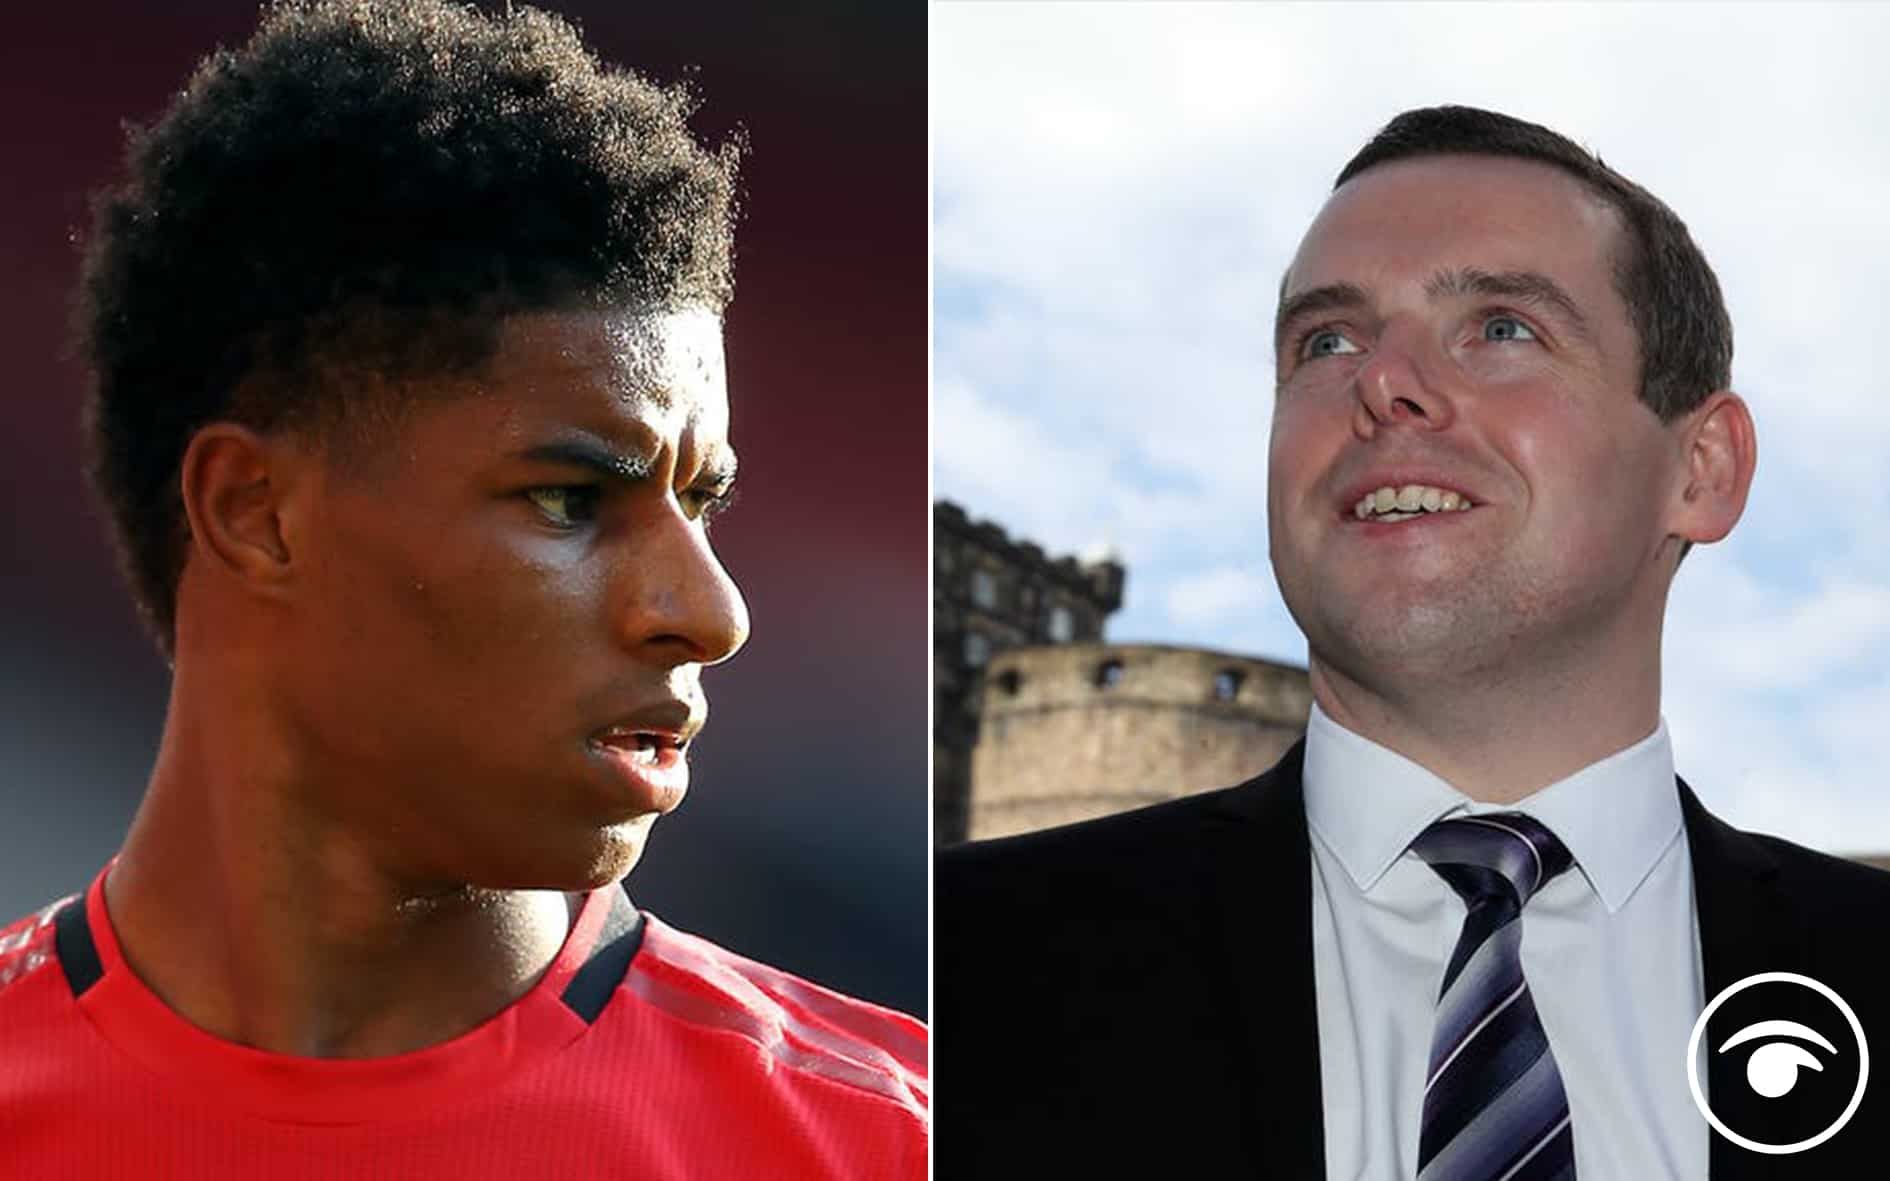 Brass neck Ross calls on SNP to follow in Rashford’s “classy footsteps” on free school meals